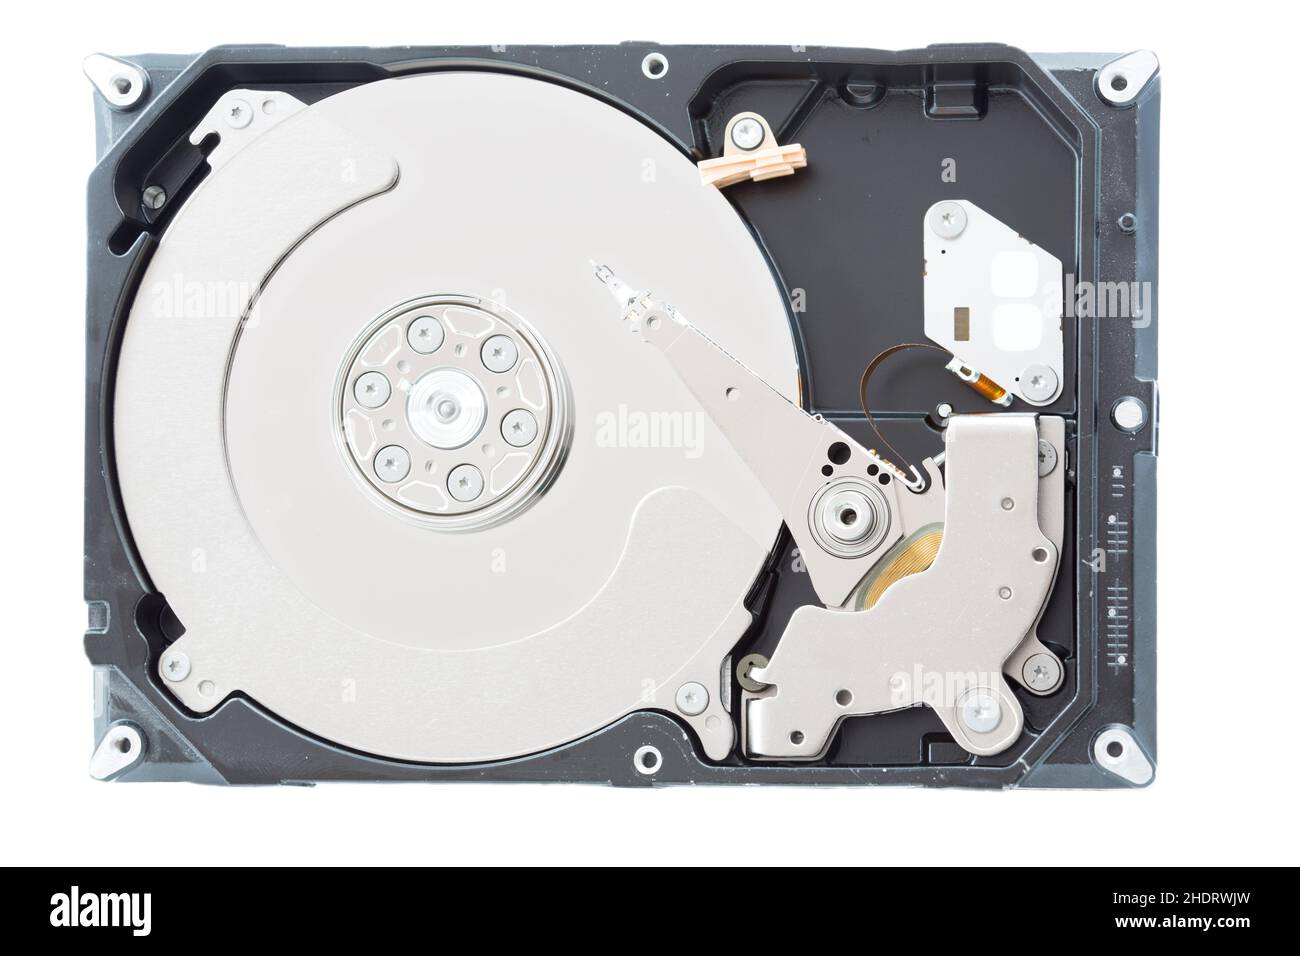 hard drive, disk read, hard drives, disk reads Stock Photo